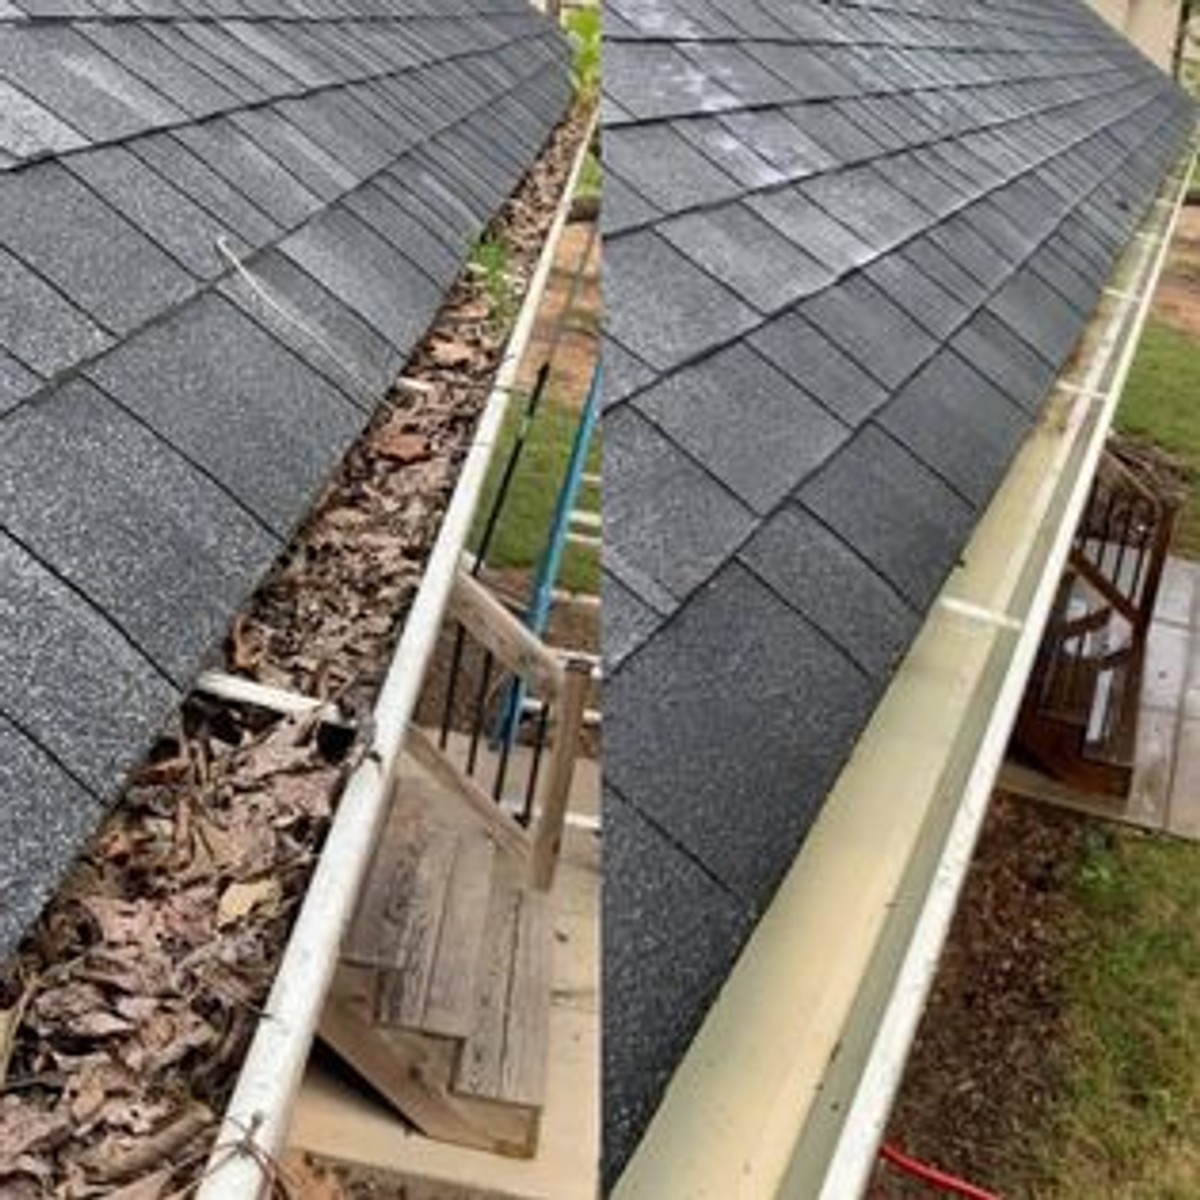 Gutter Cleaning for Total Property Solutions in Saint Matthews, KY